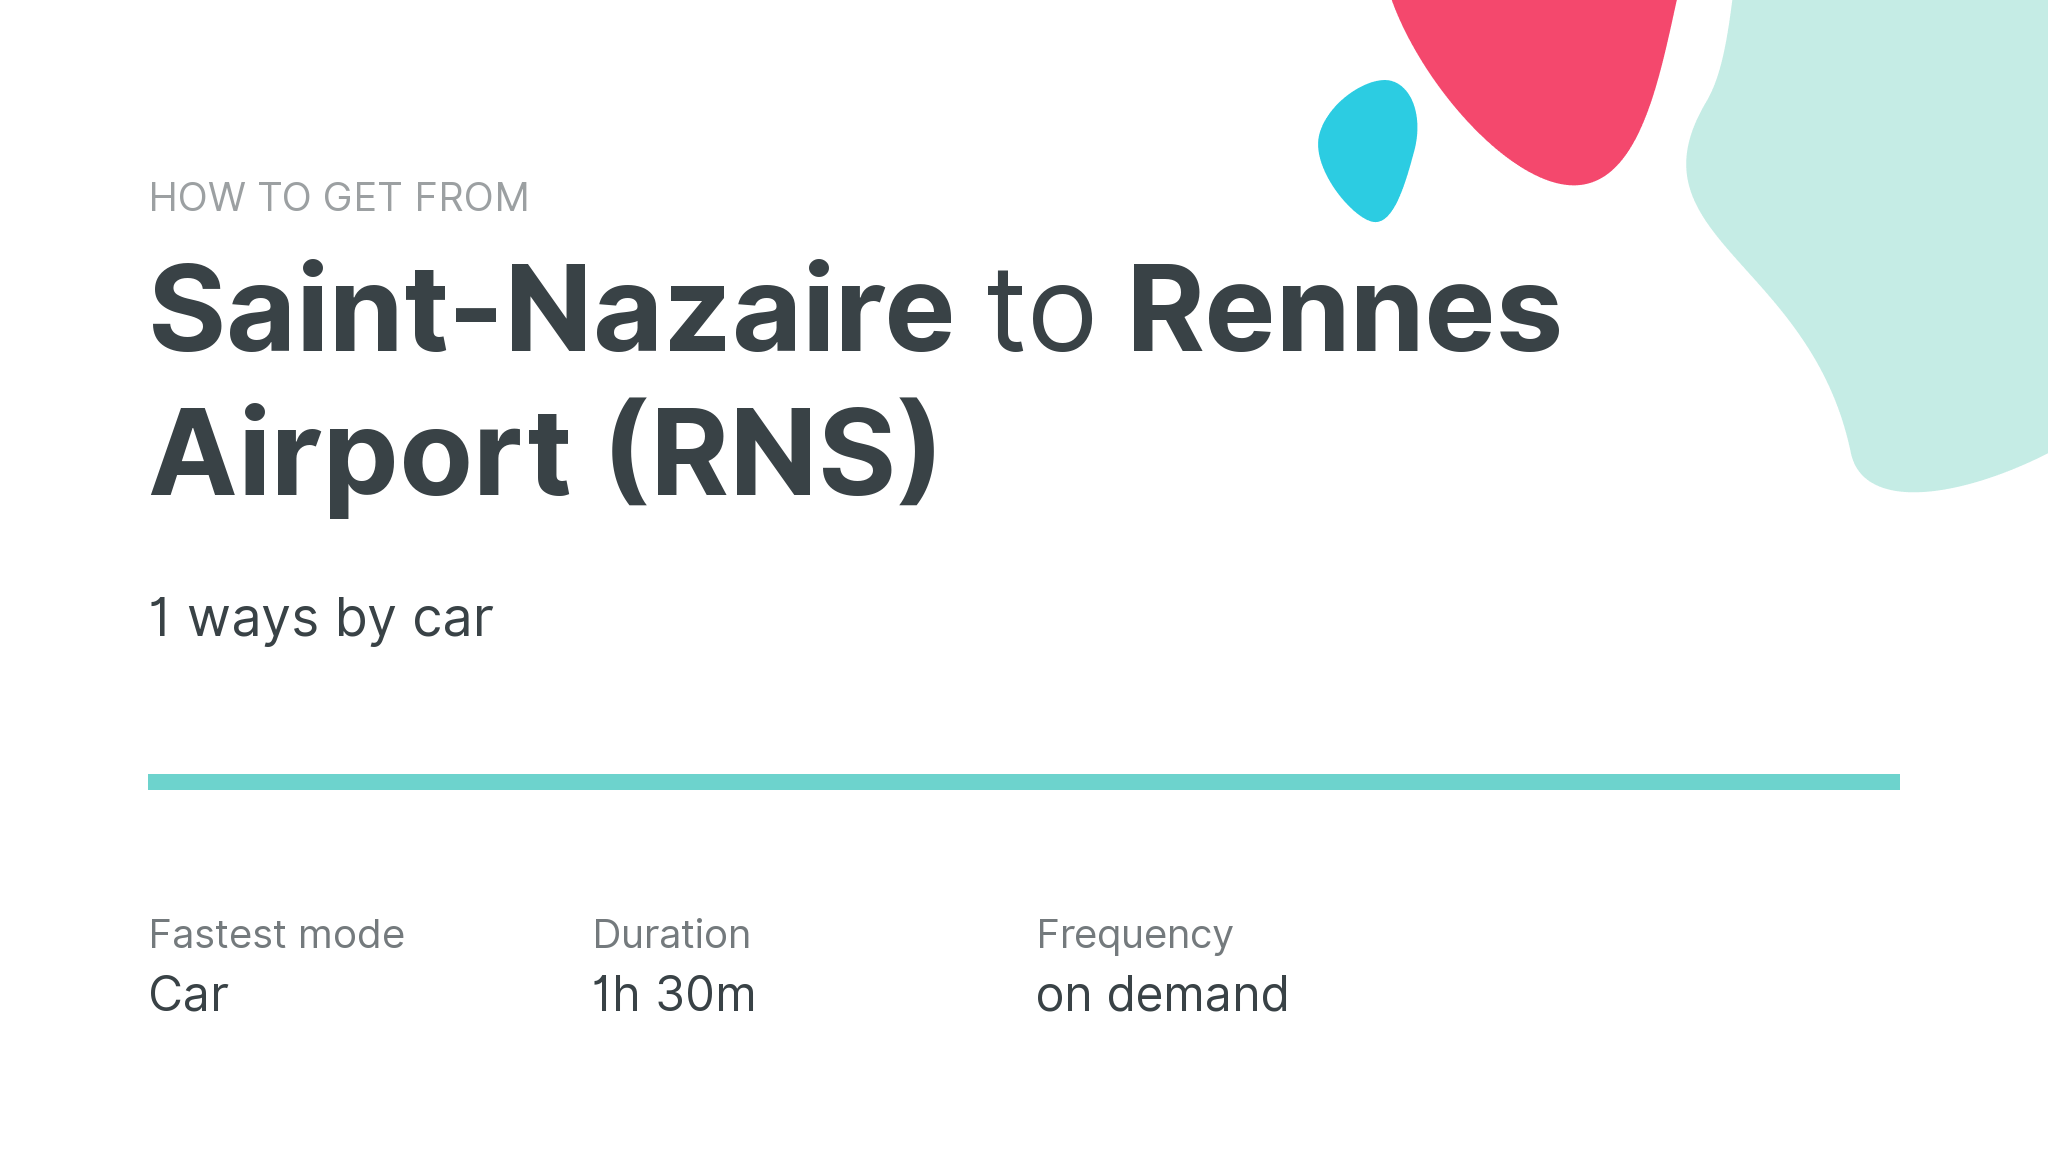 How do I get from Saint-Nazaire to Rennes Airport (RNS)